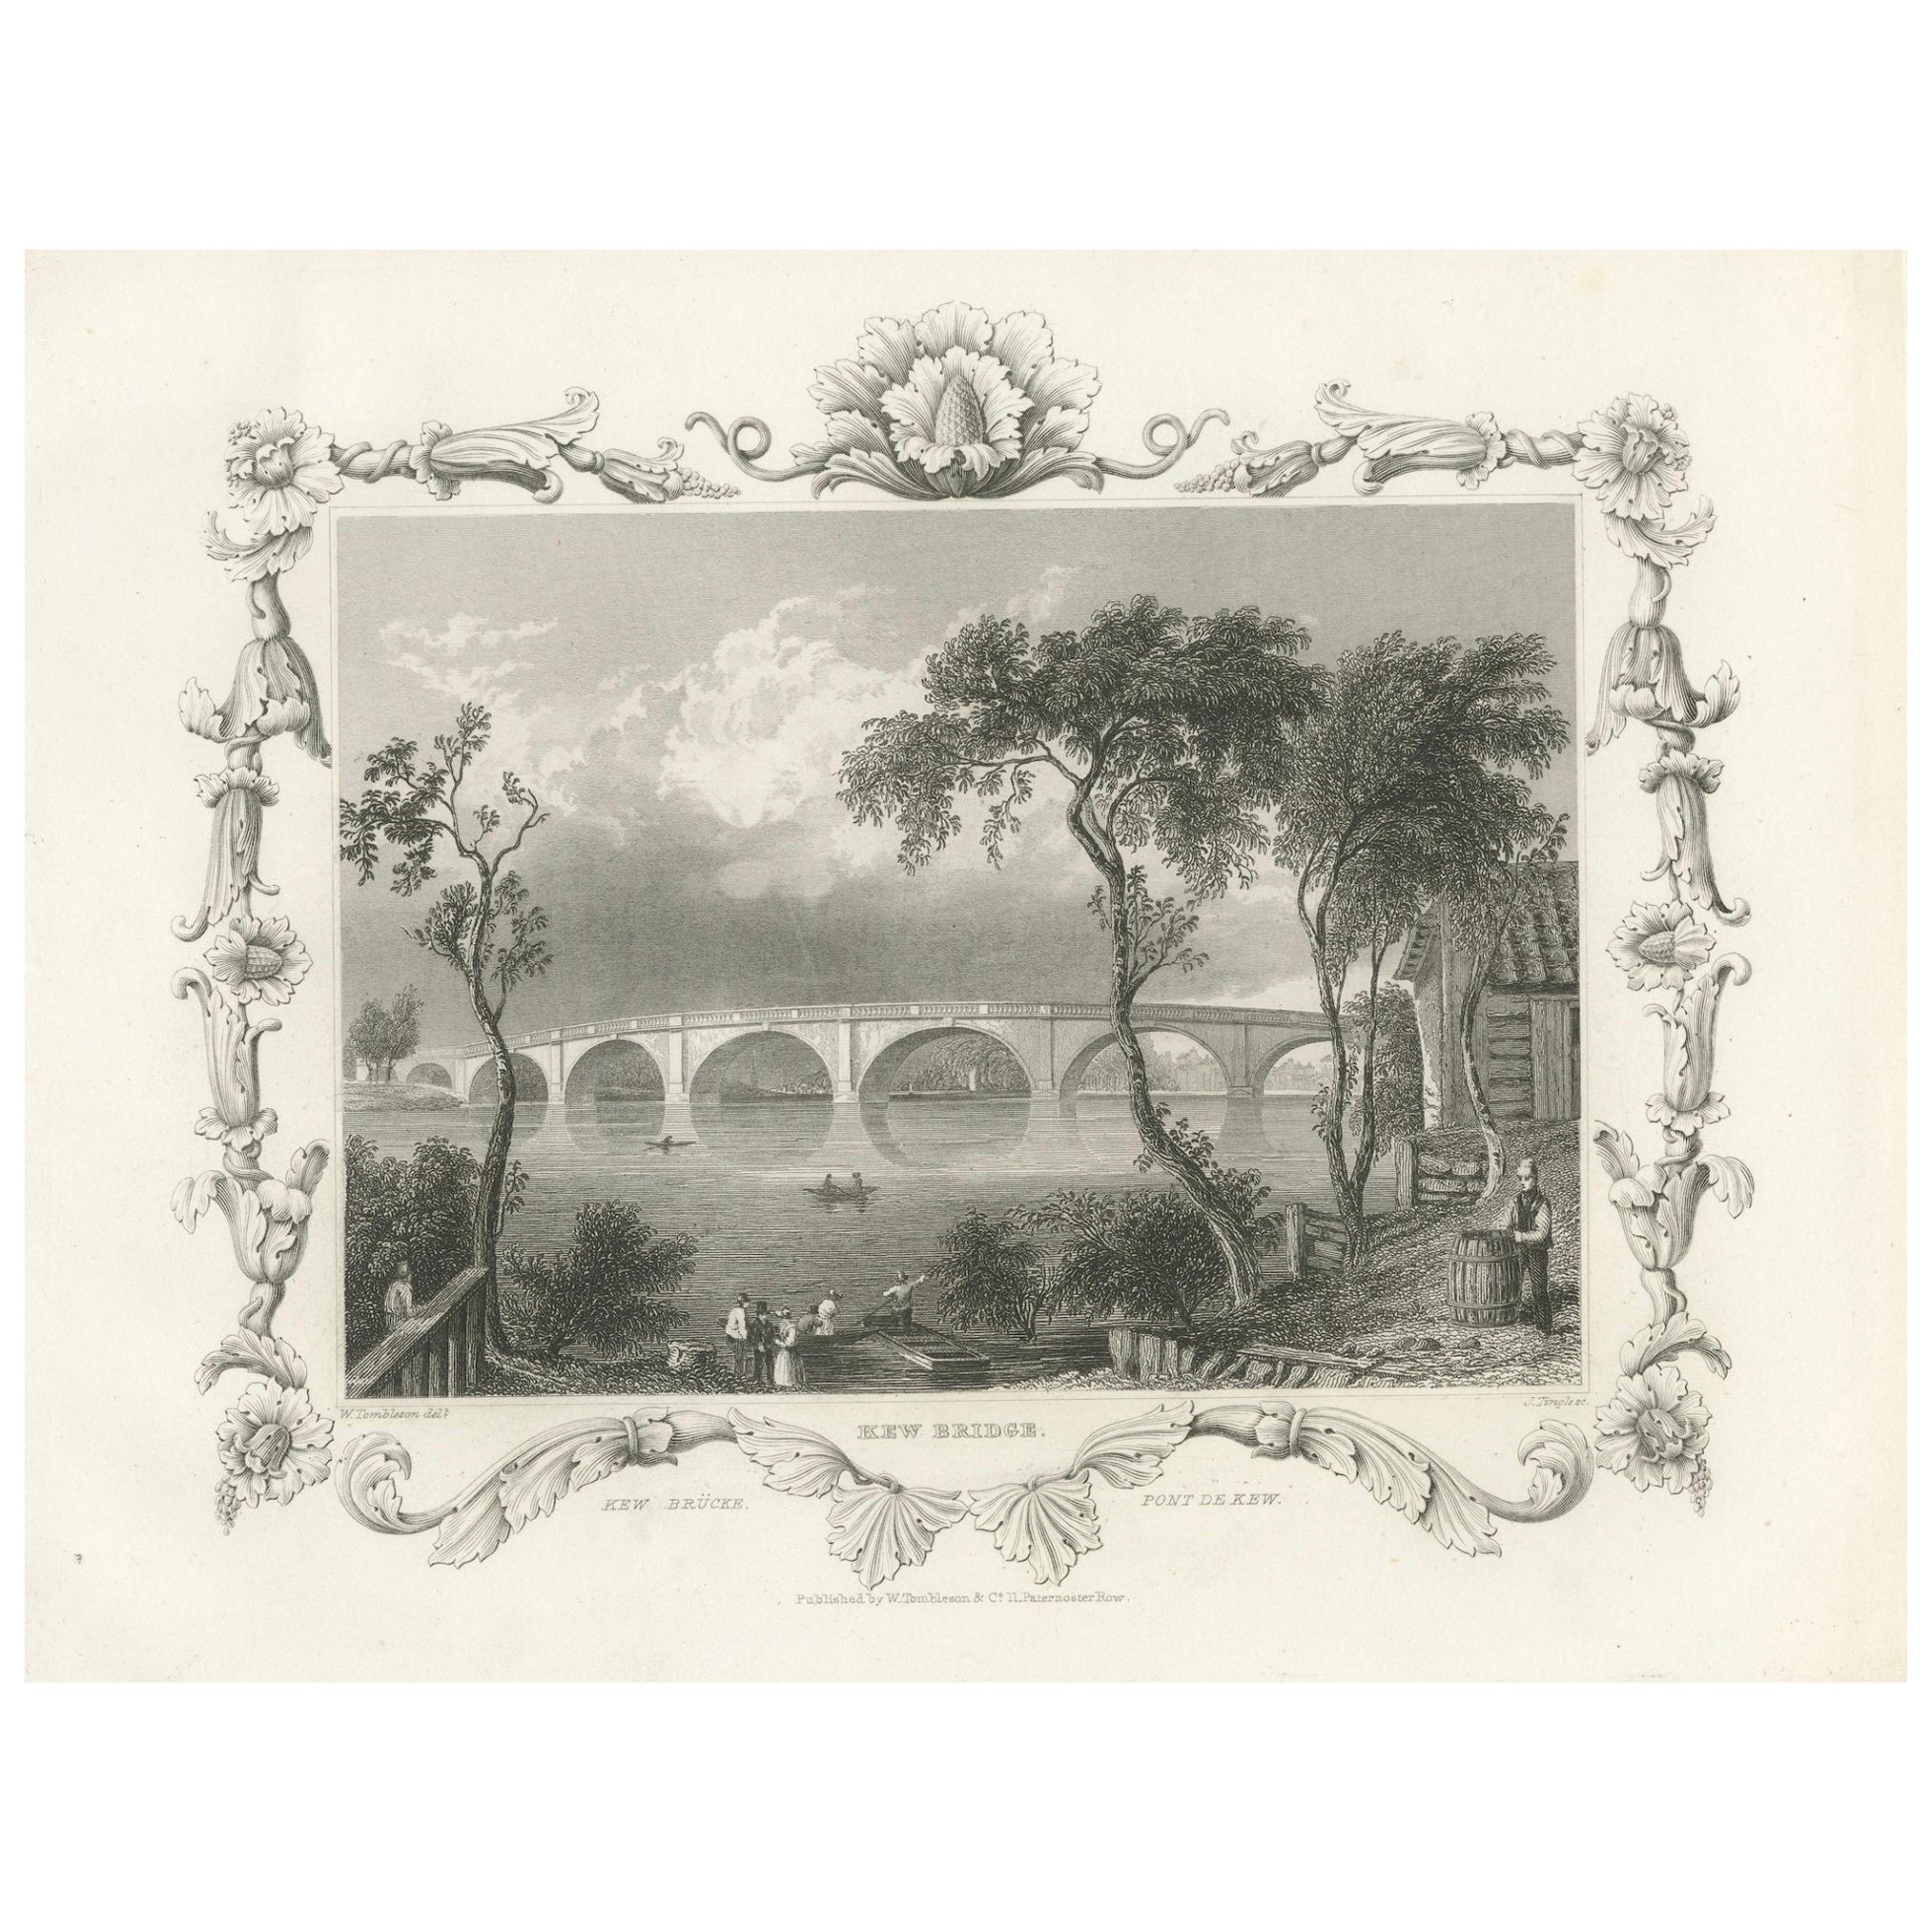  Charming Engraving of Kew Bridge over the River Thames, 1835 For Sale